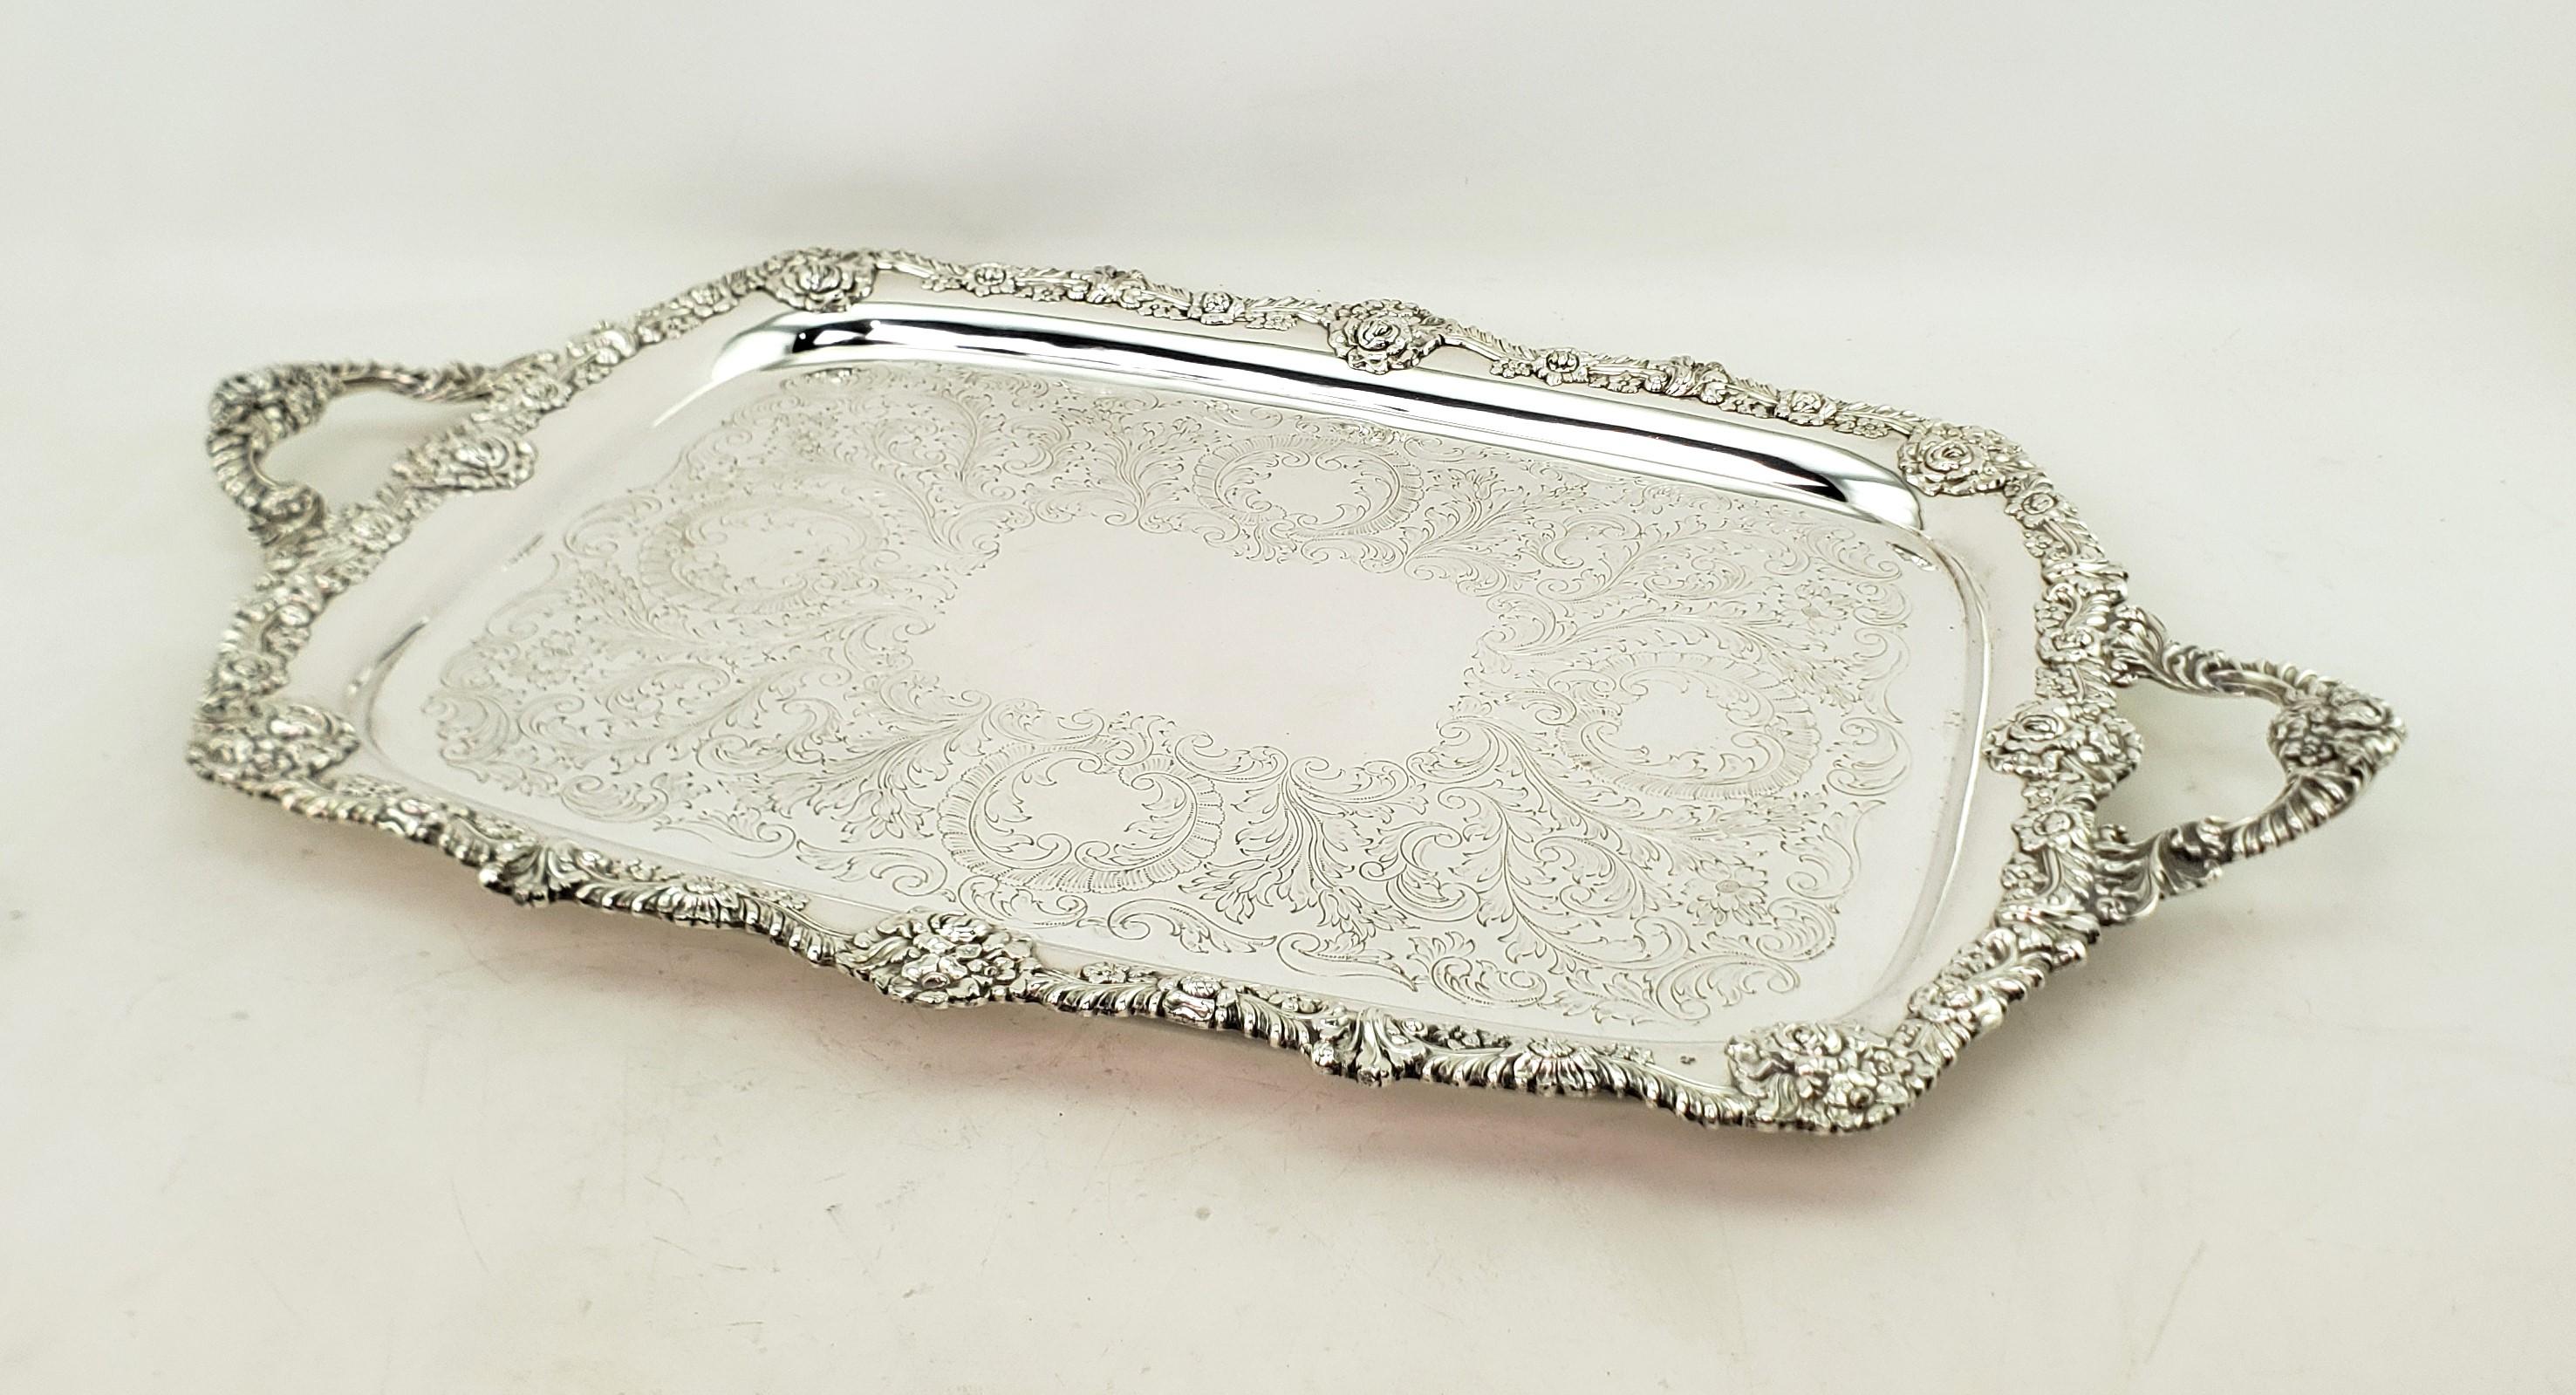 Large Antique English Silver Plated Serving Tray with Ornate Floral Decoration In Good Condition For Sale In Hamilton, Ontario